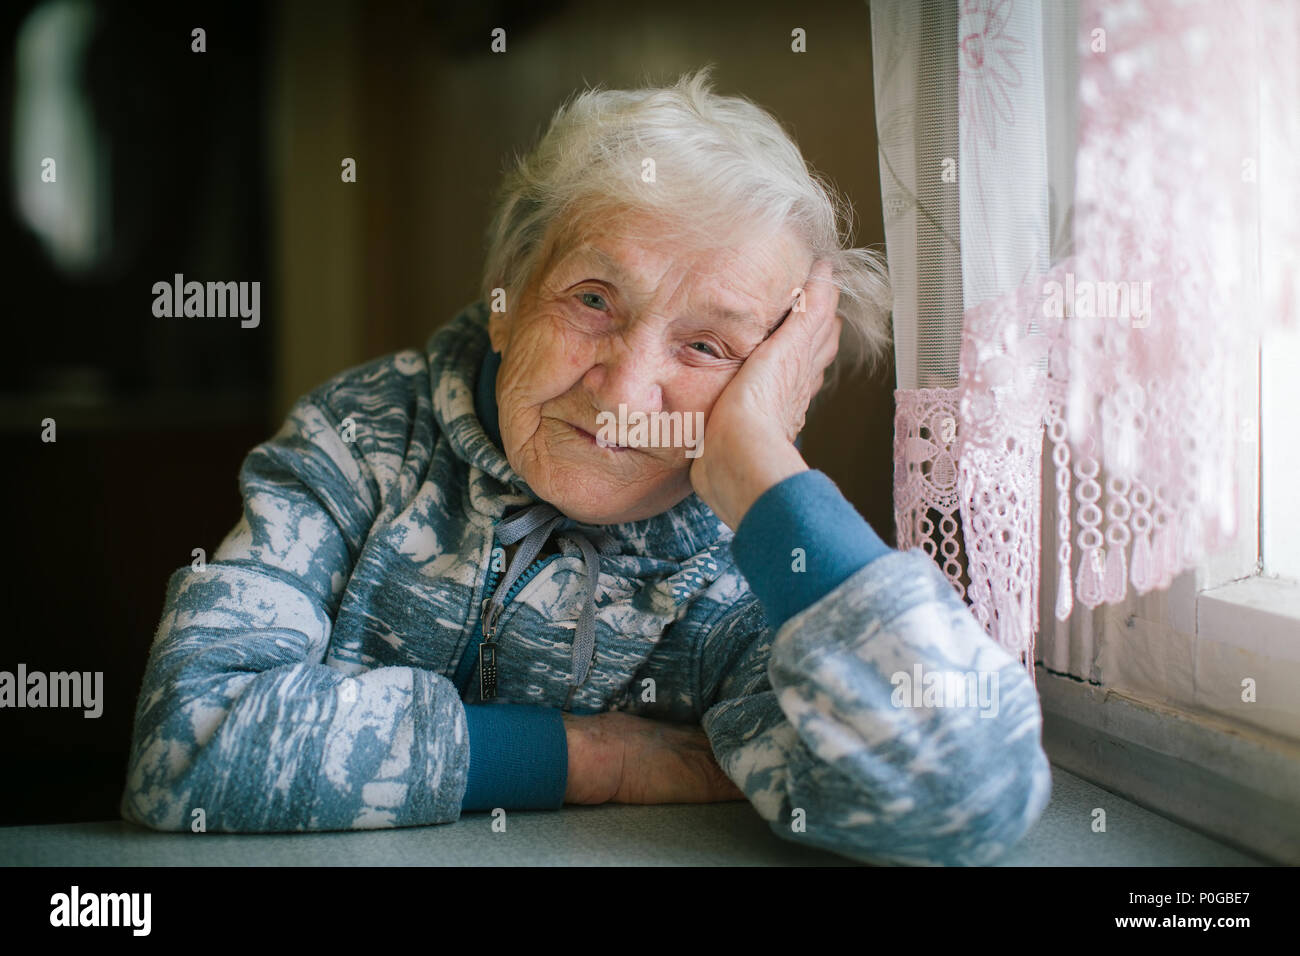 Portrait of elderly woman. Age 90 years old. Stock Photo